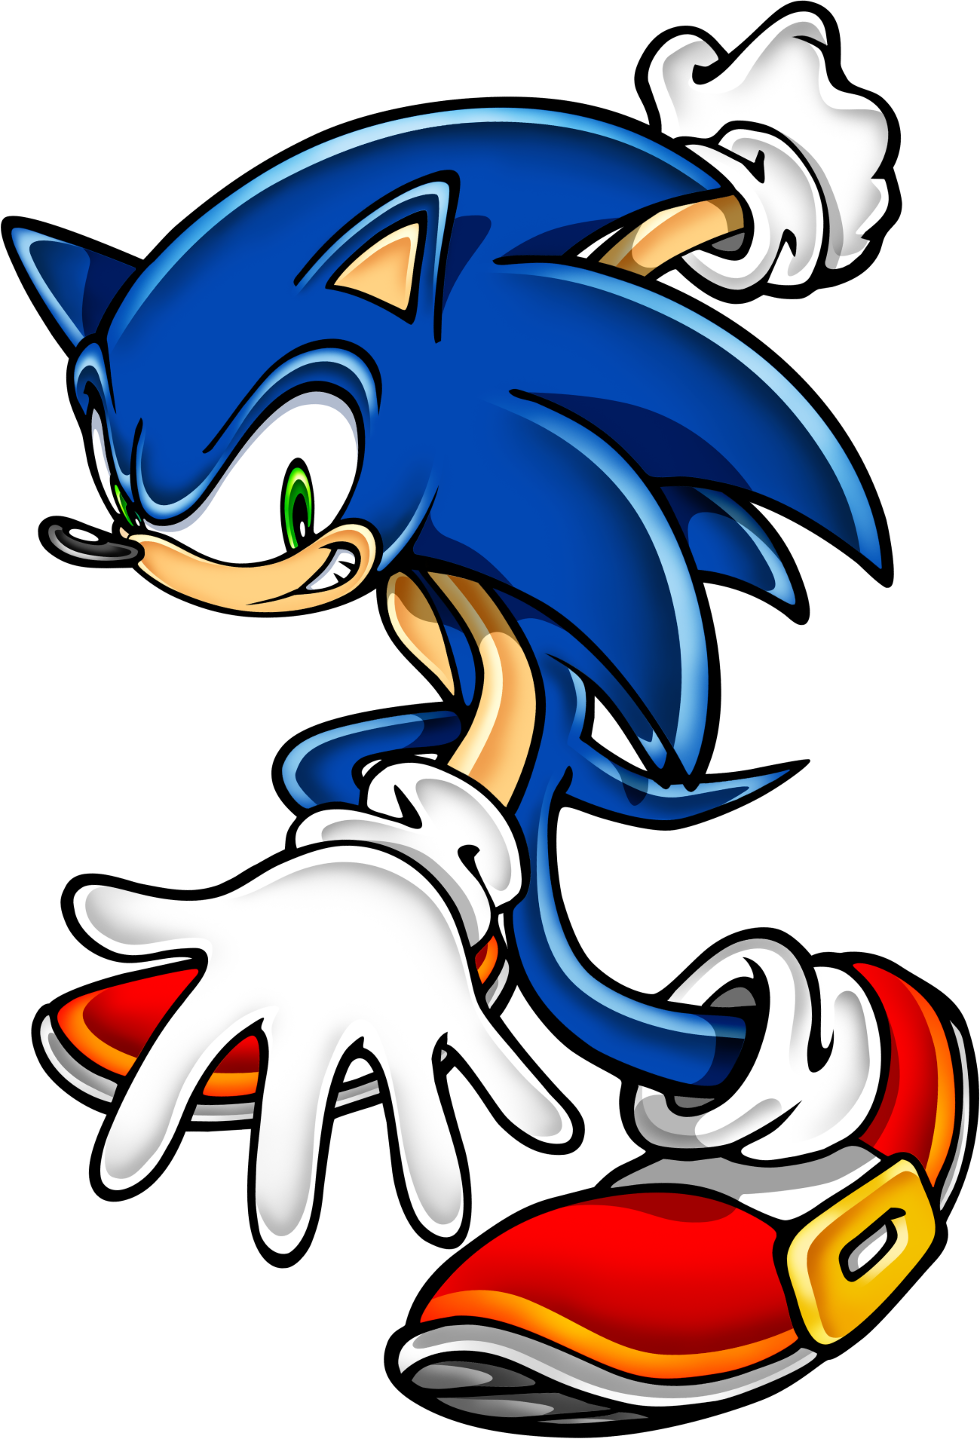 sonic the hedgehog character